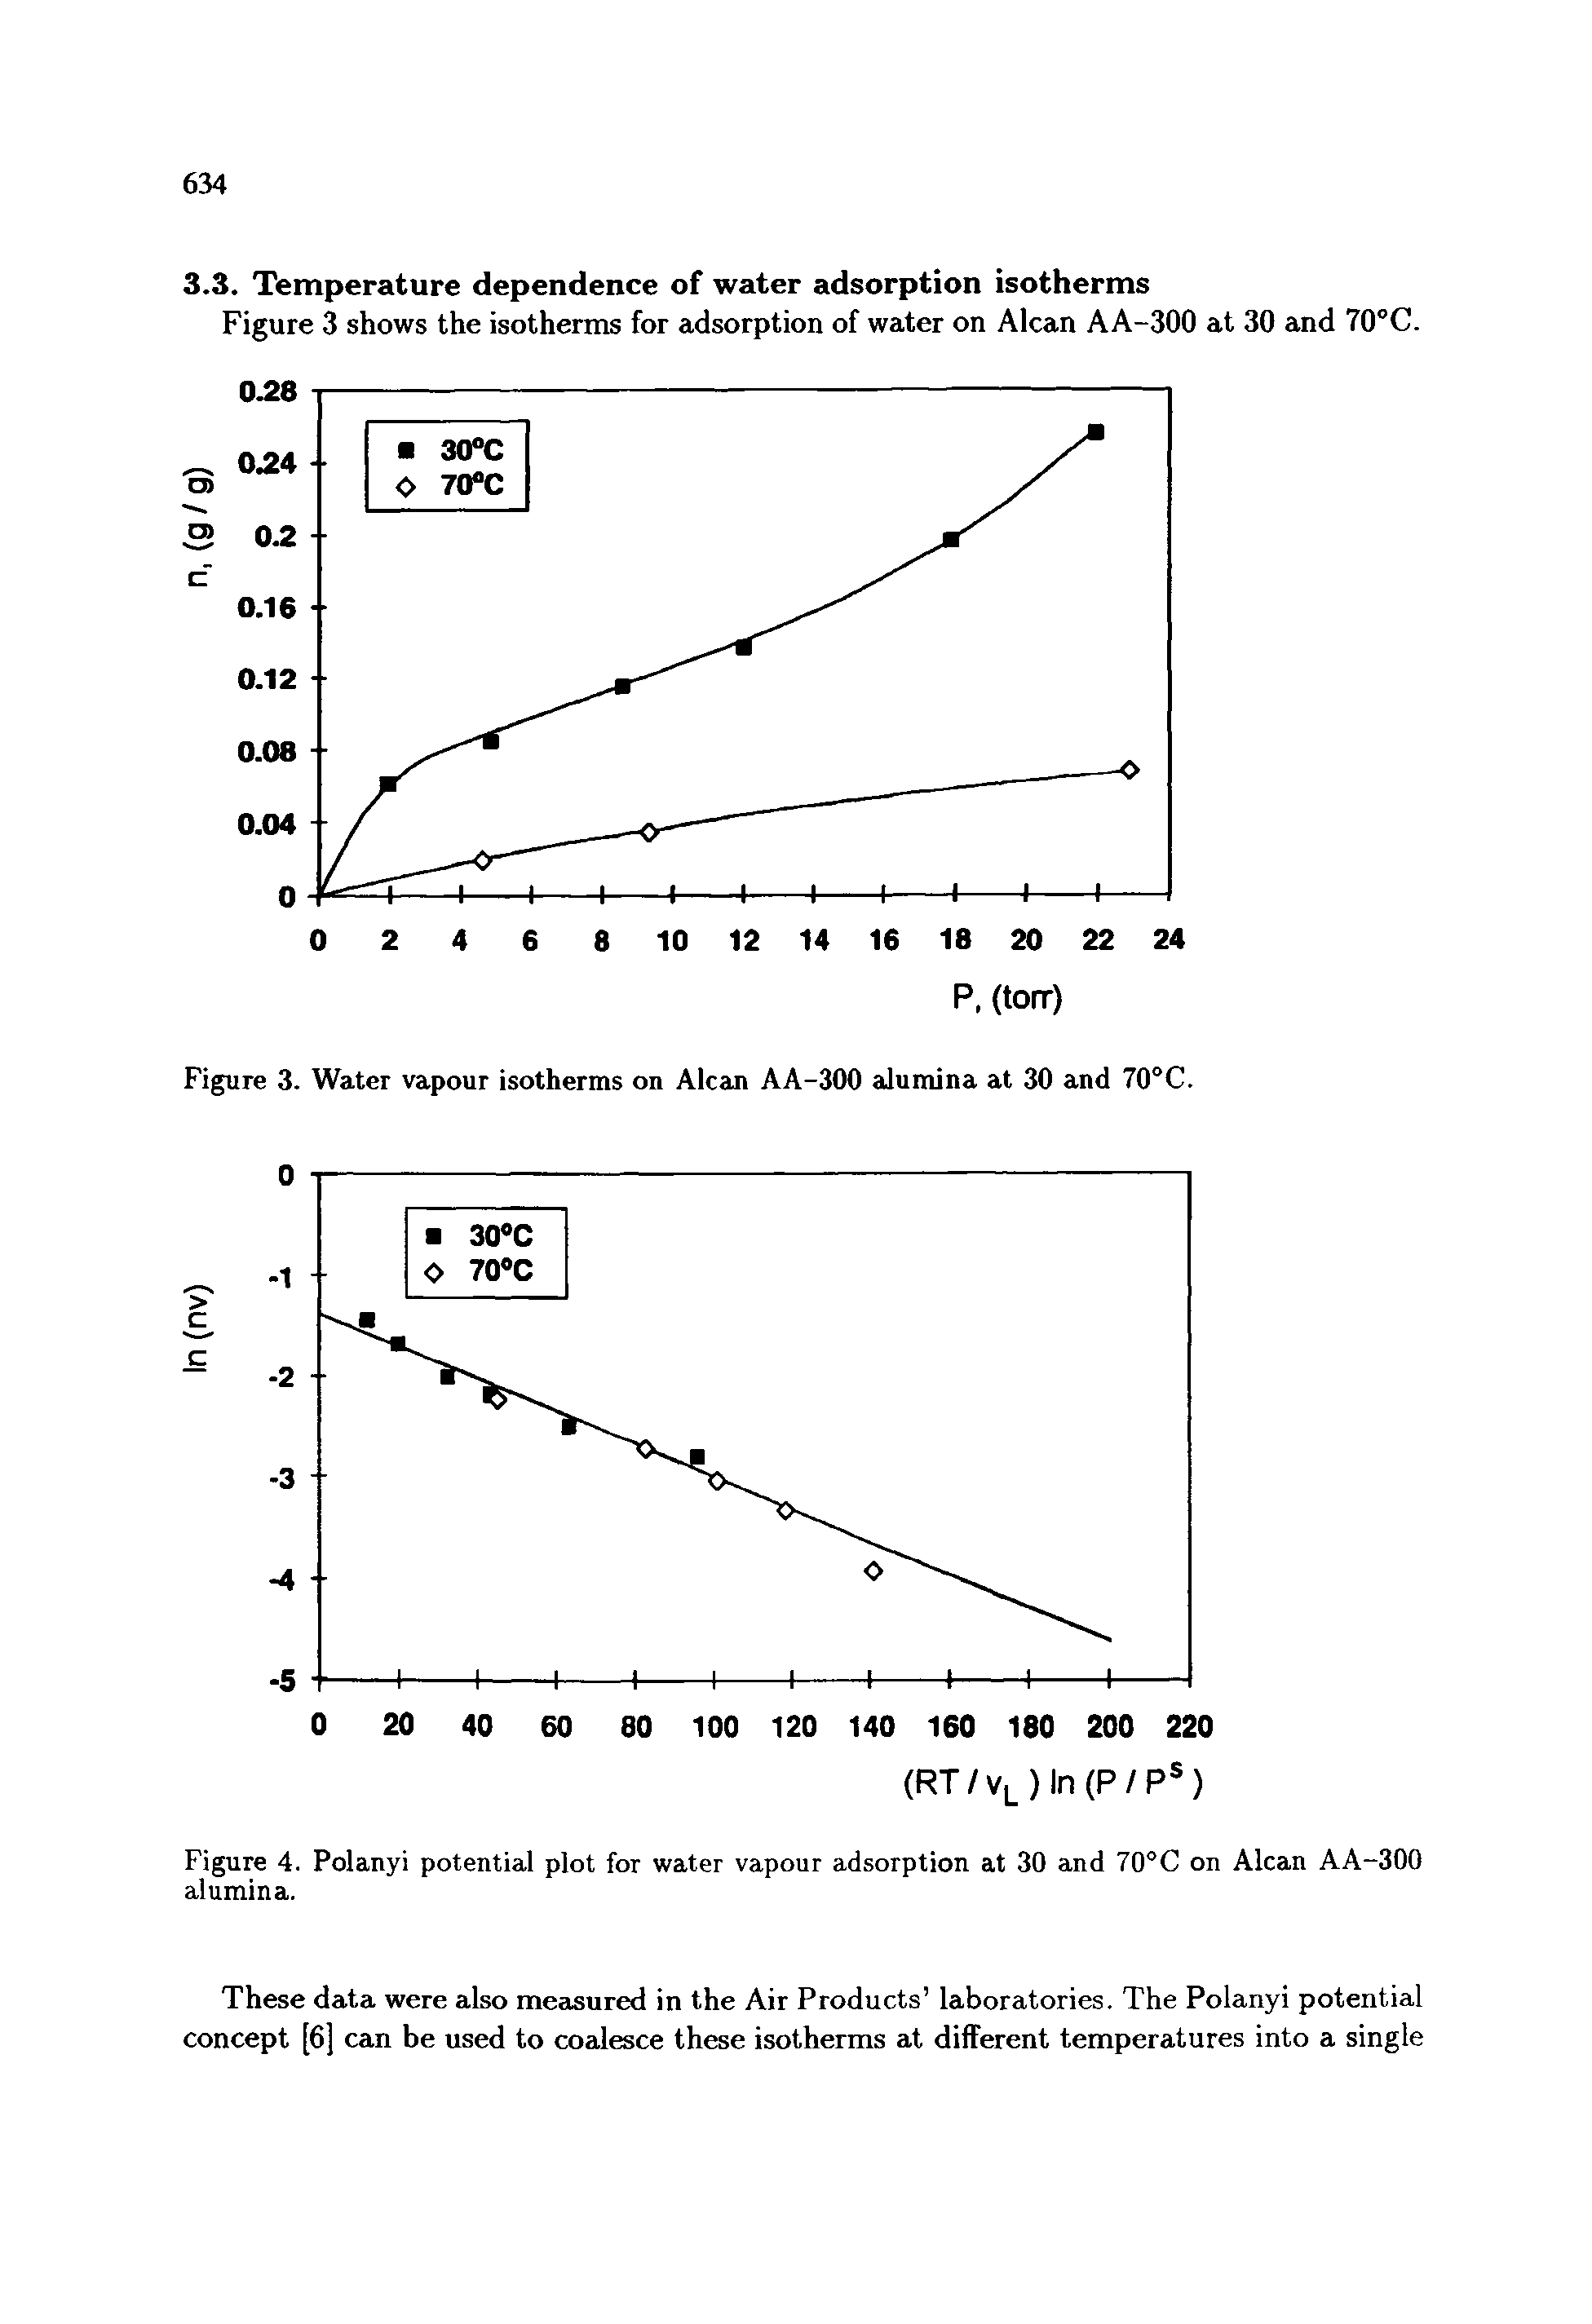 Figure 4. Polanyi potential plot for water vapour adsorption at 30 and 70°C on Alcan AA-300 alumina.